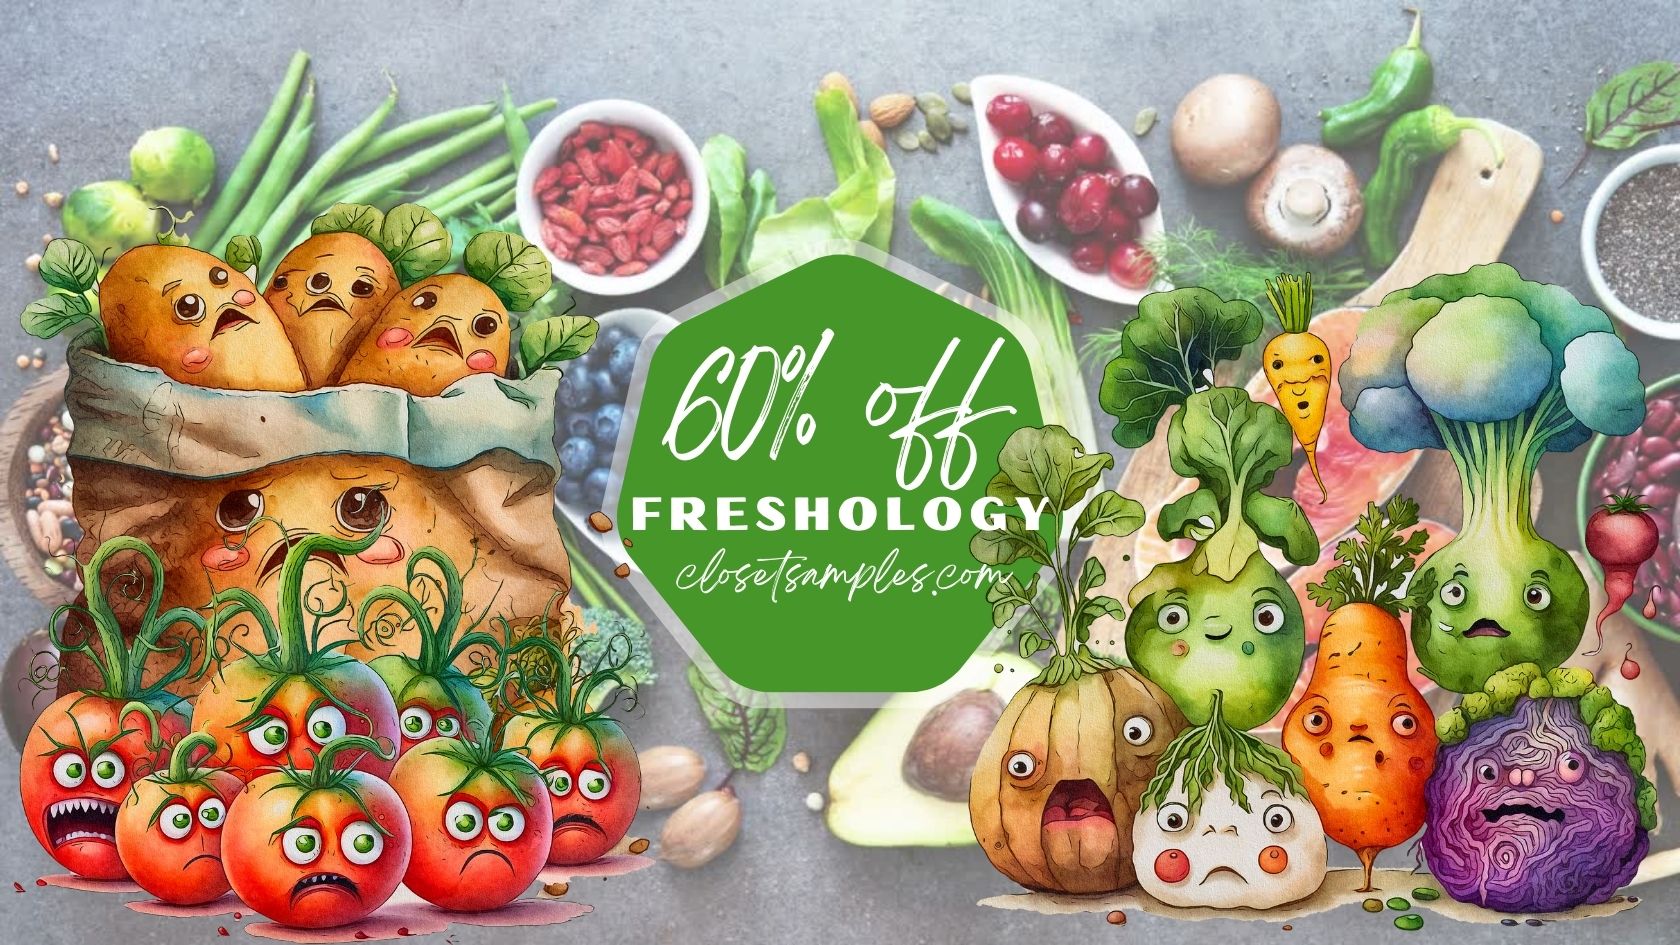 Get 60 Off Your First Order with Freshology Healthy Eating Made Affordable closetsamples